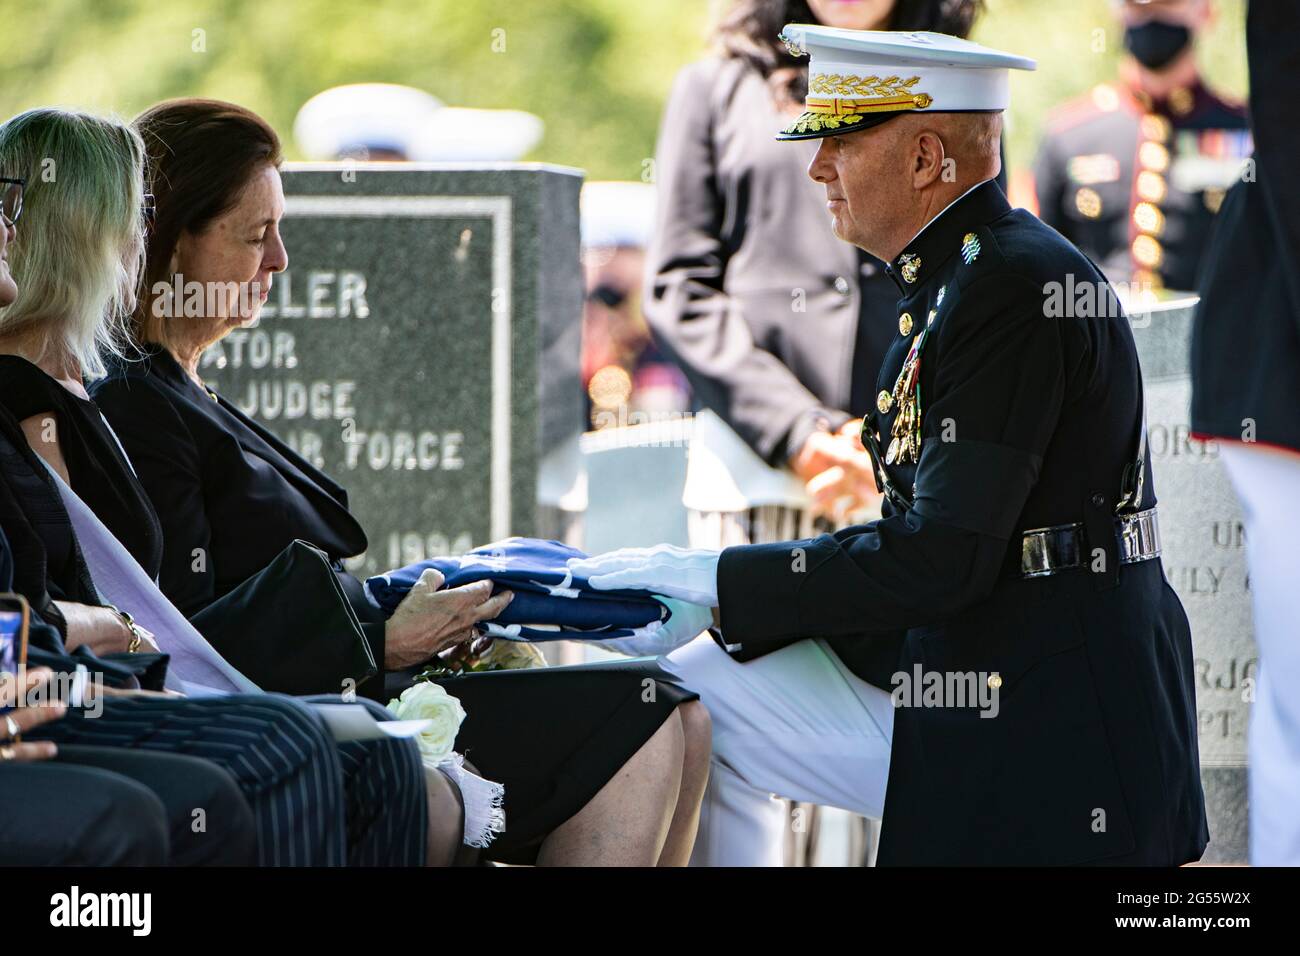 U.S. Marine Corps Commandant Gen. David Berger presents the flag to Jeanne Warner, wife of former U.S. Senator and Marine Corps 1st Lt. John Warner during his funeral in Arlington National Cemetery June 23, 2021 in Arlington, Virginia. Warner, a Senator for Virginia for 30-years and Secretary of the Navy died May 25th. Stock Photo